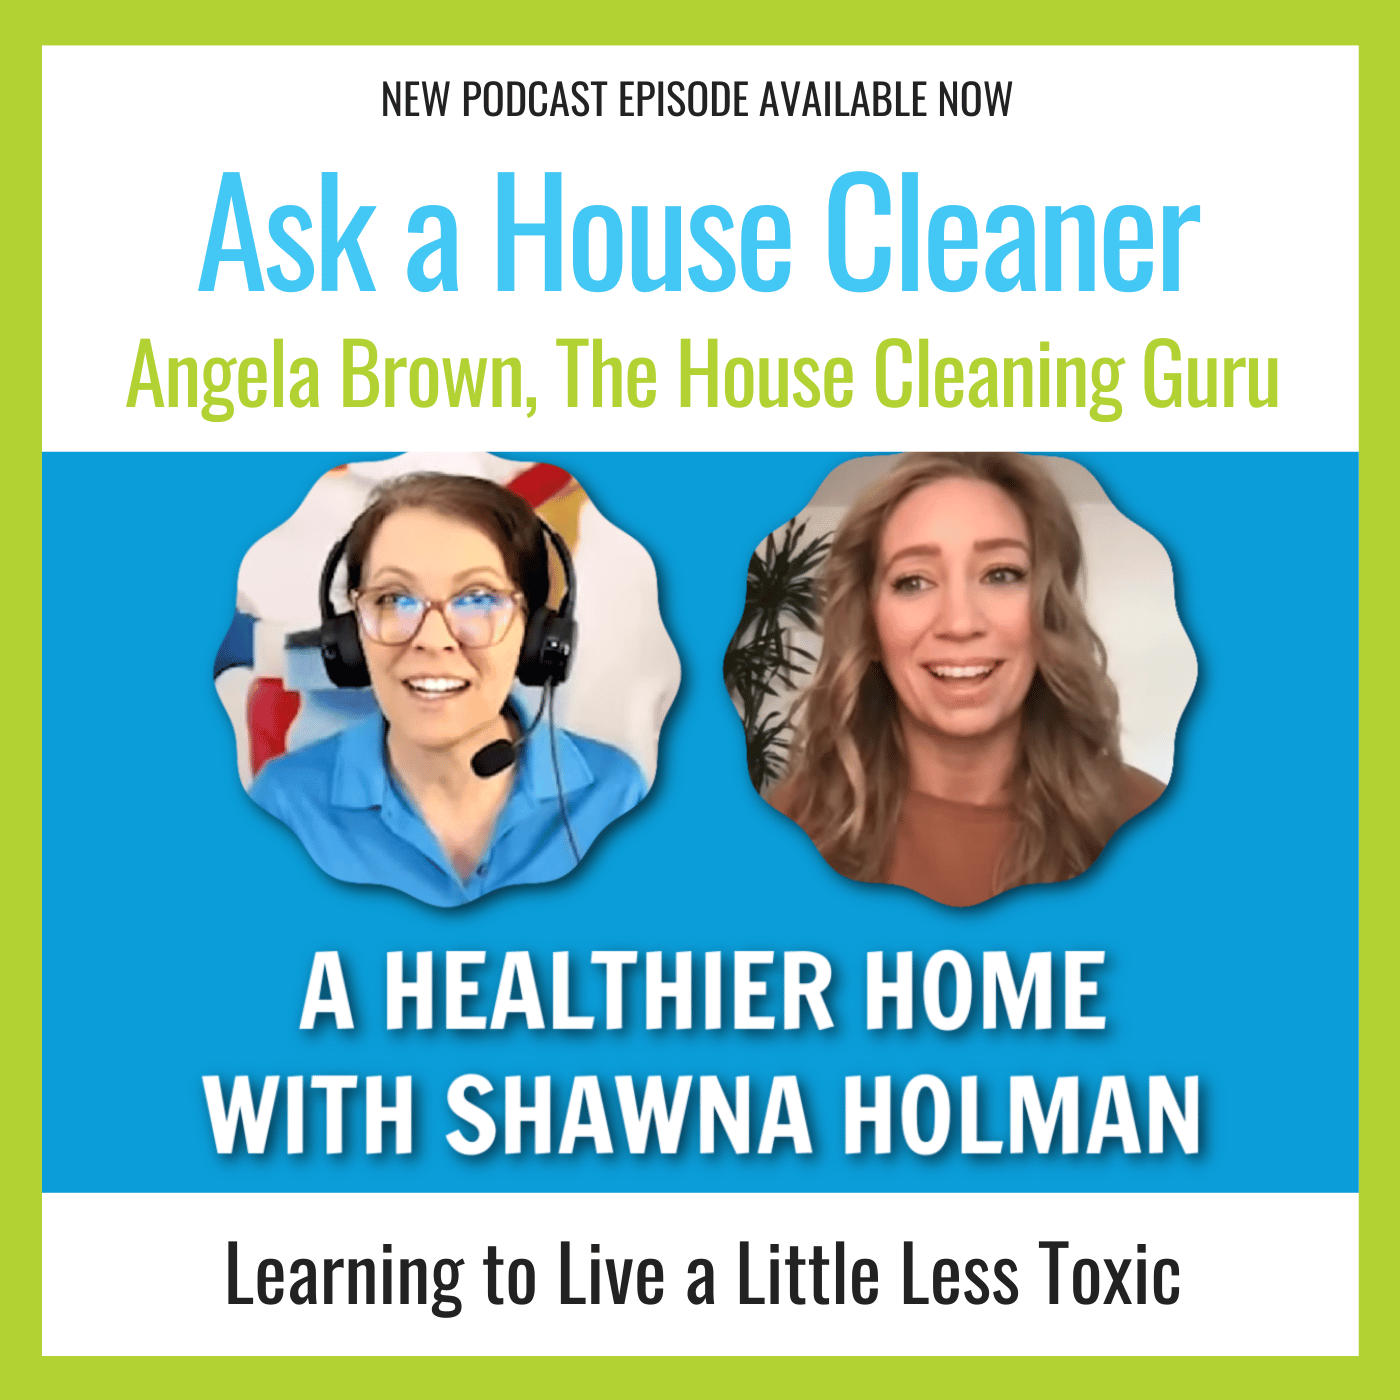 A Healthier Home with Shawna Holman Angela Brown Ask a House Cleaner Podcast